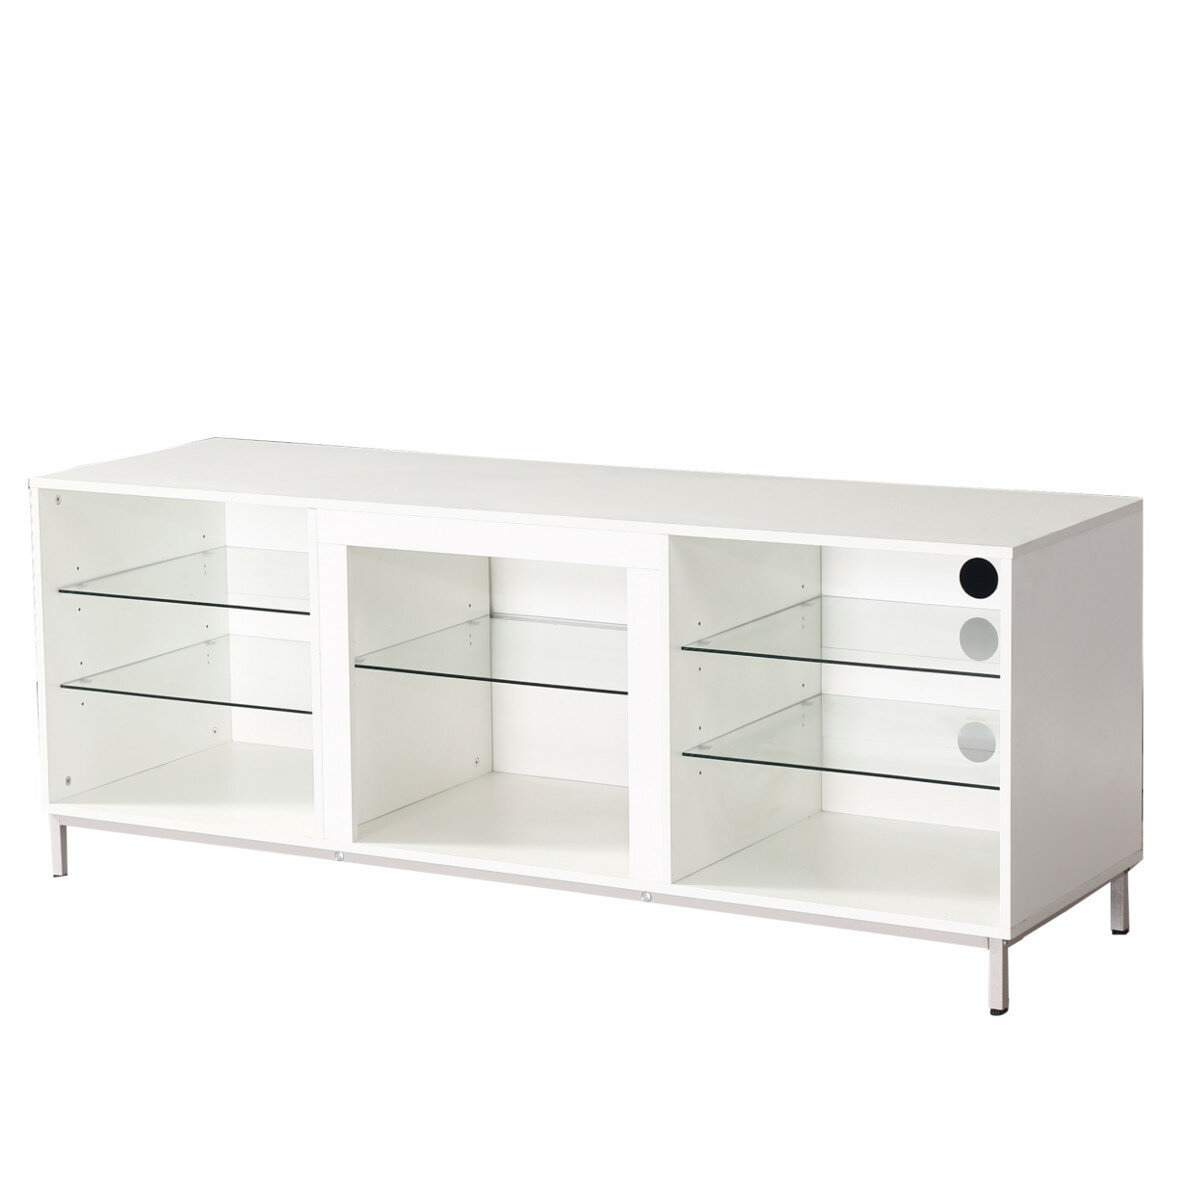 Image of Home Side Table Storage Cabinet P2MDF Glass Steel Frame with LED Light for Home Office